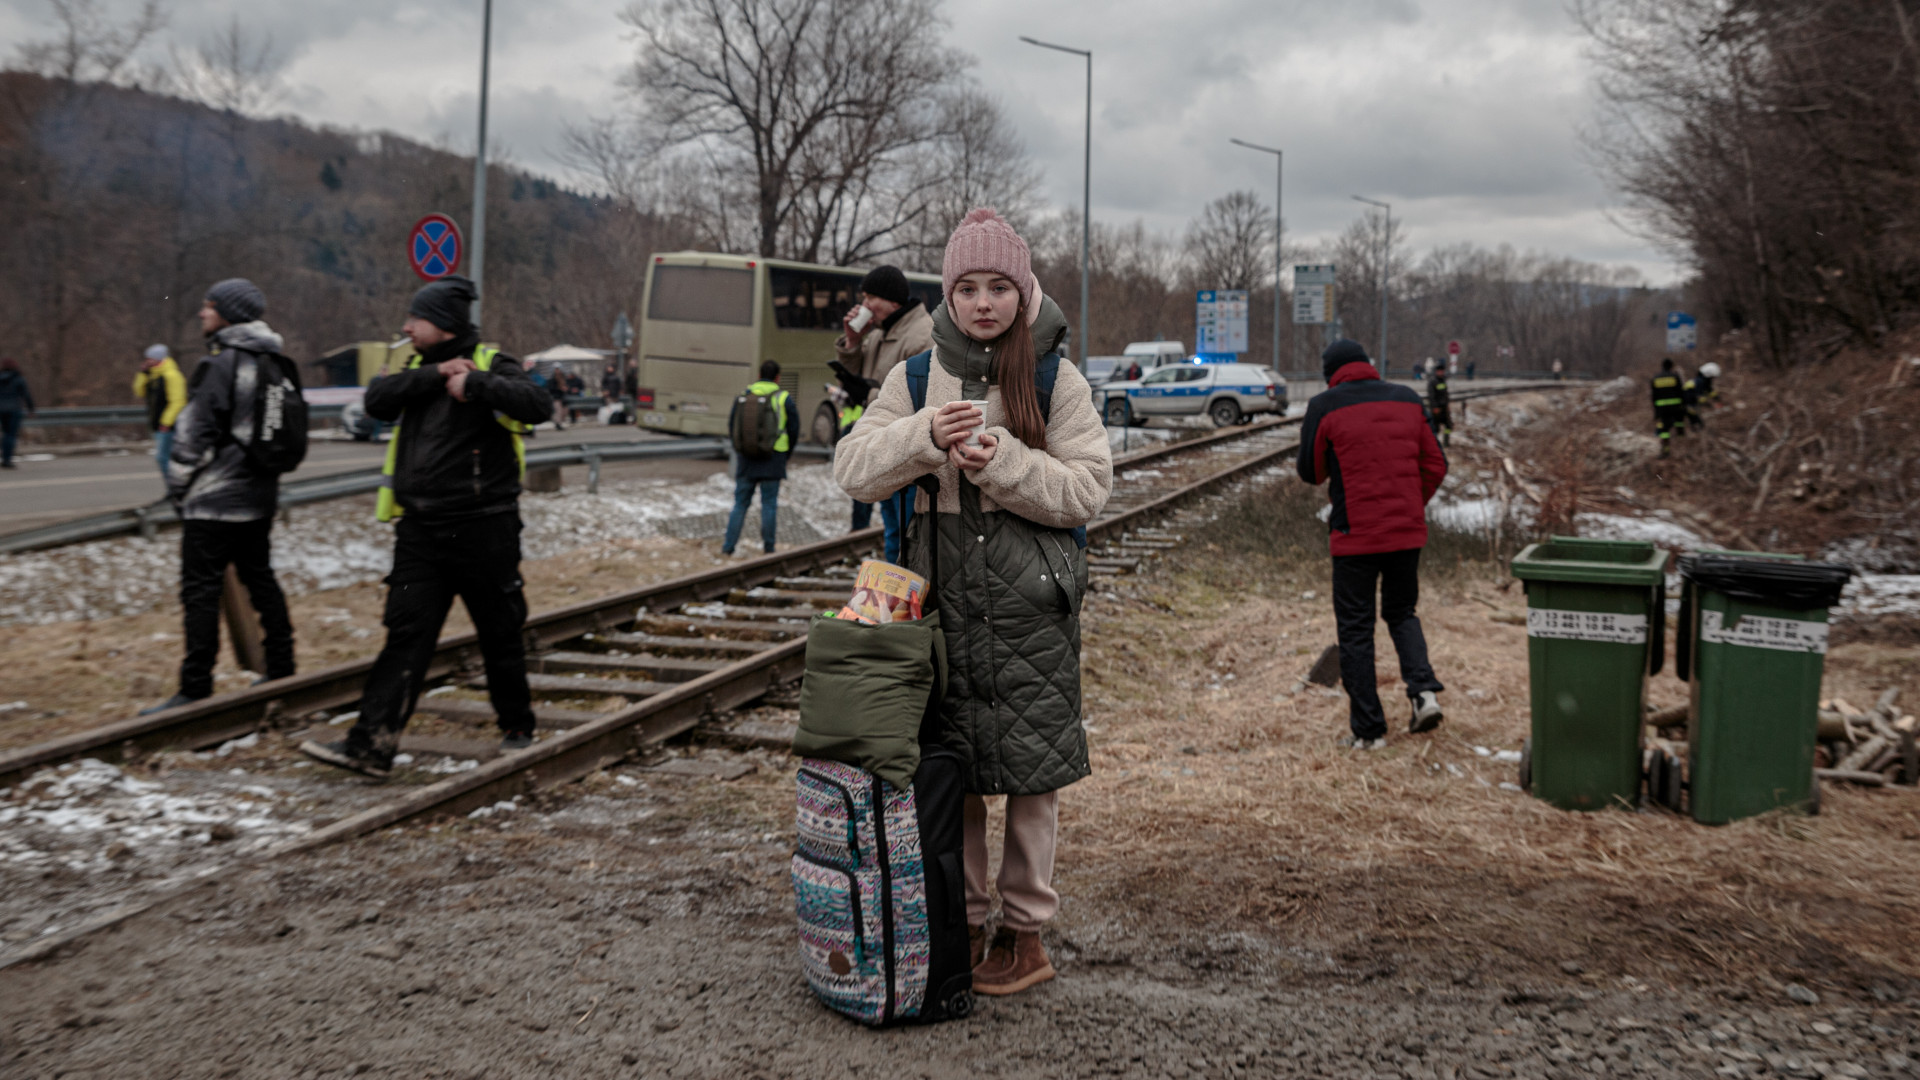 They revealed how many refugees can leave Ukraine